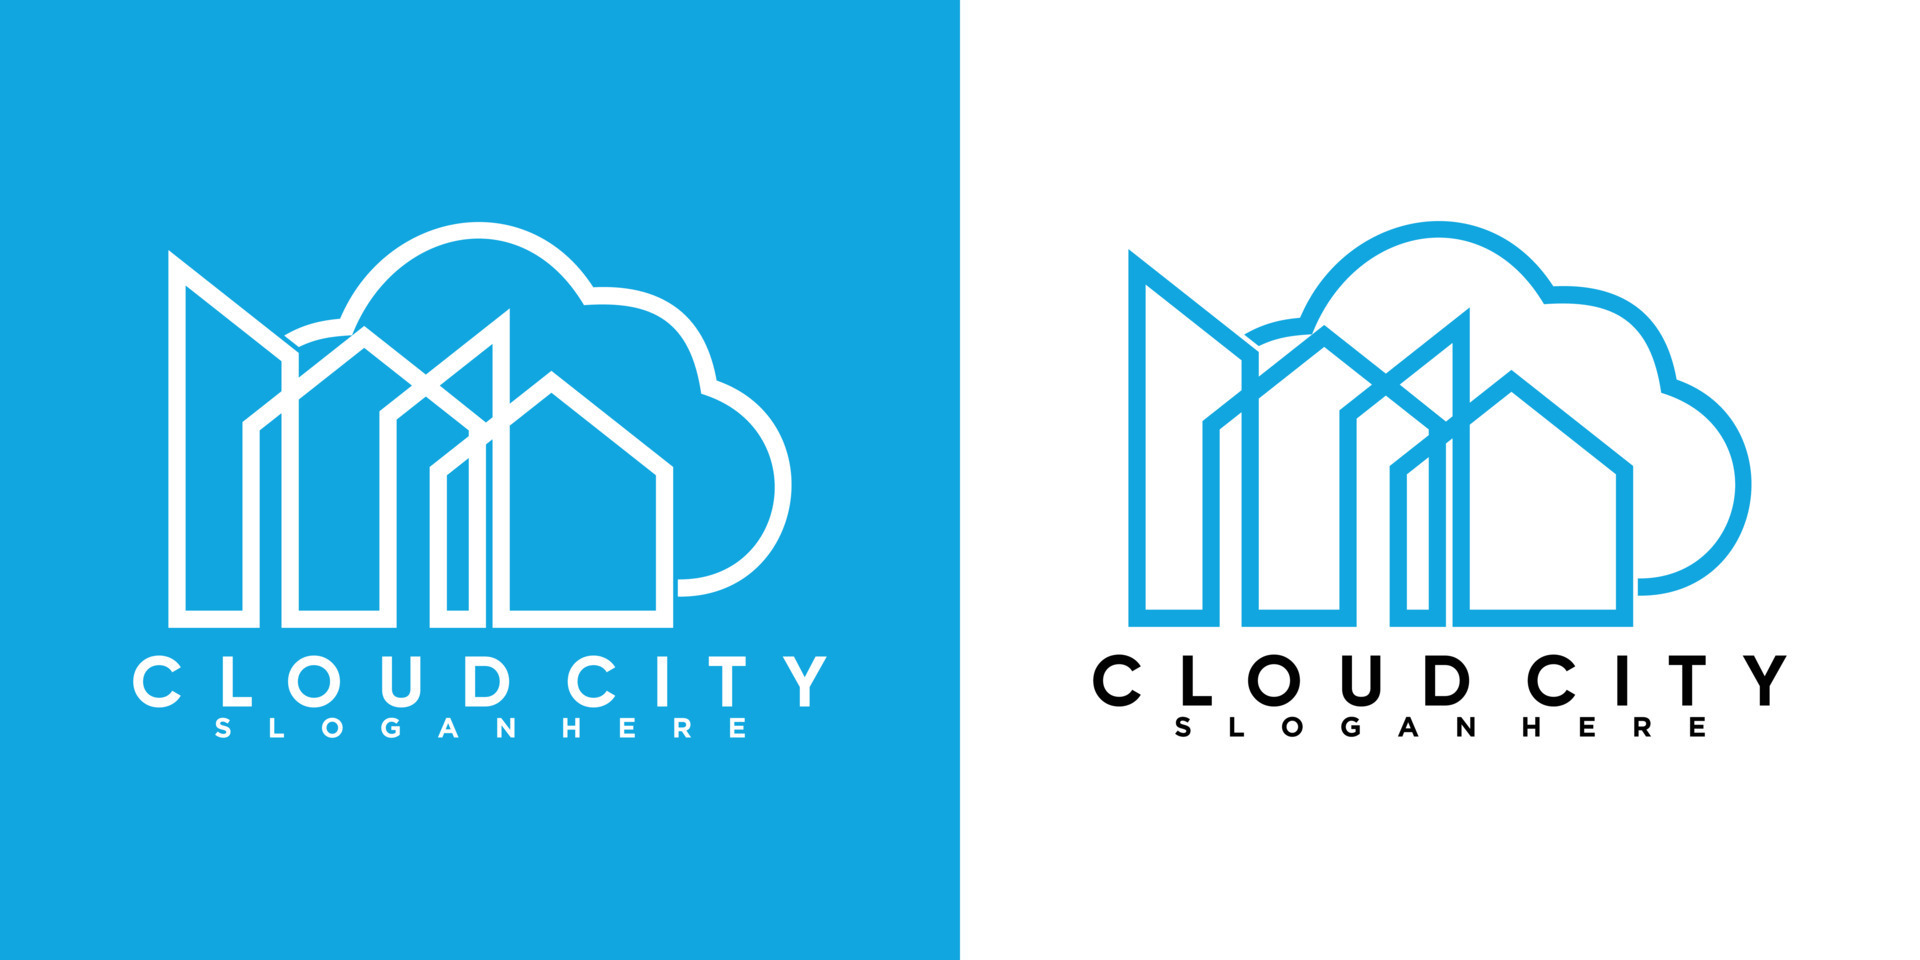 cloud city logo design with style and cretive concept 11825523 Vector ...